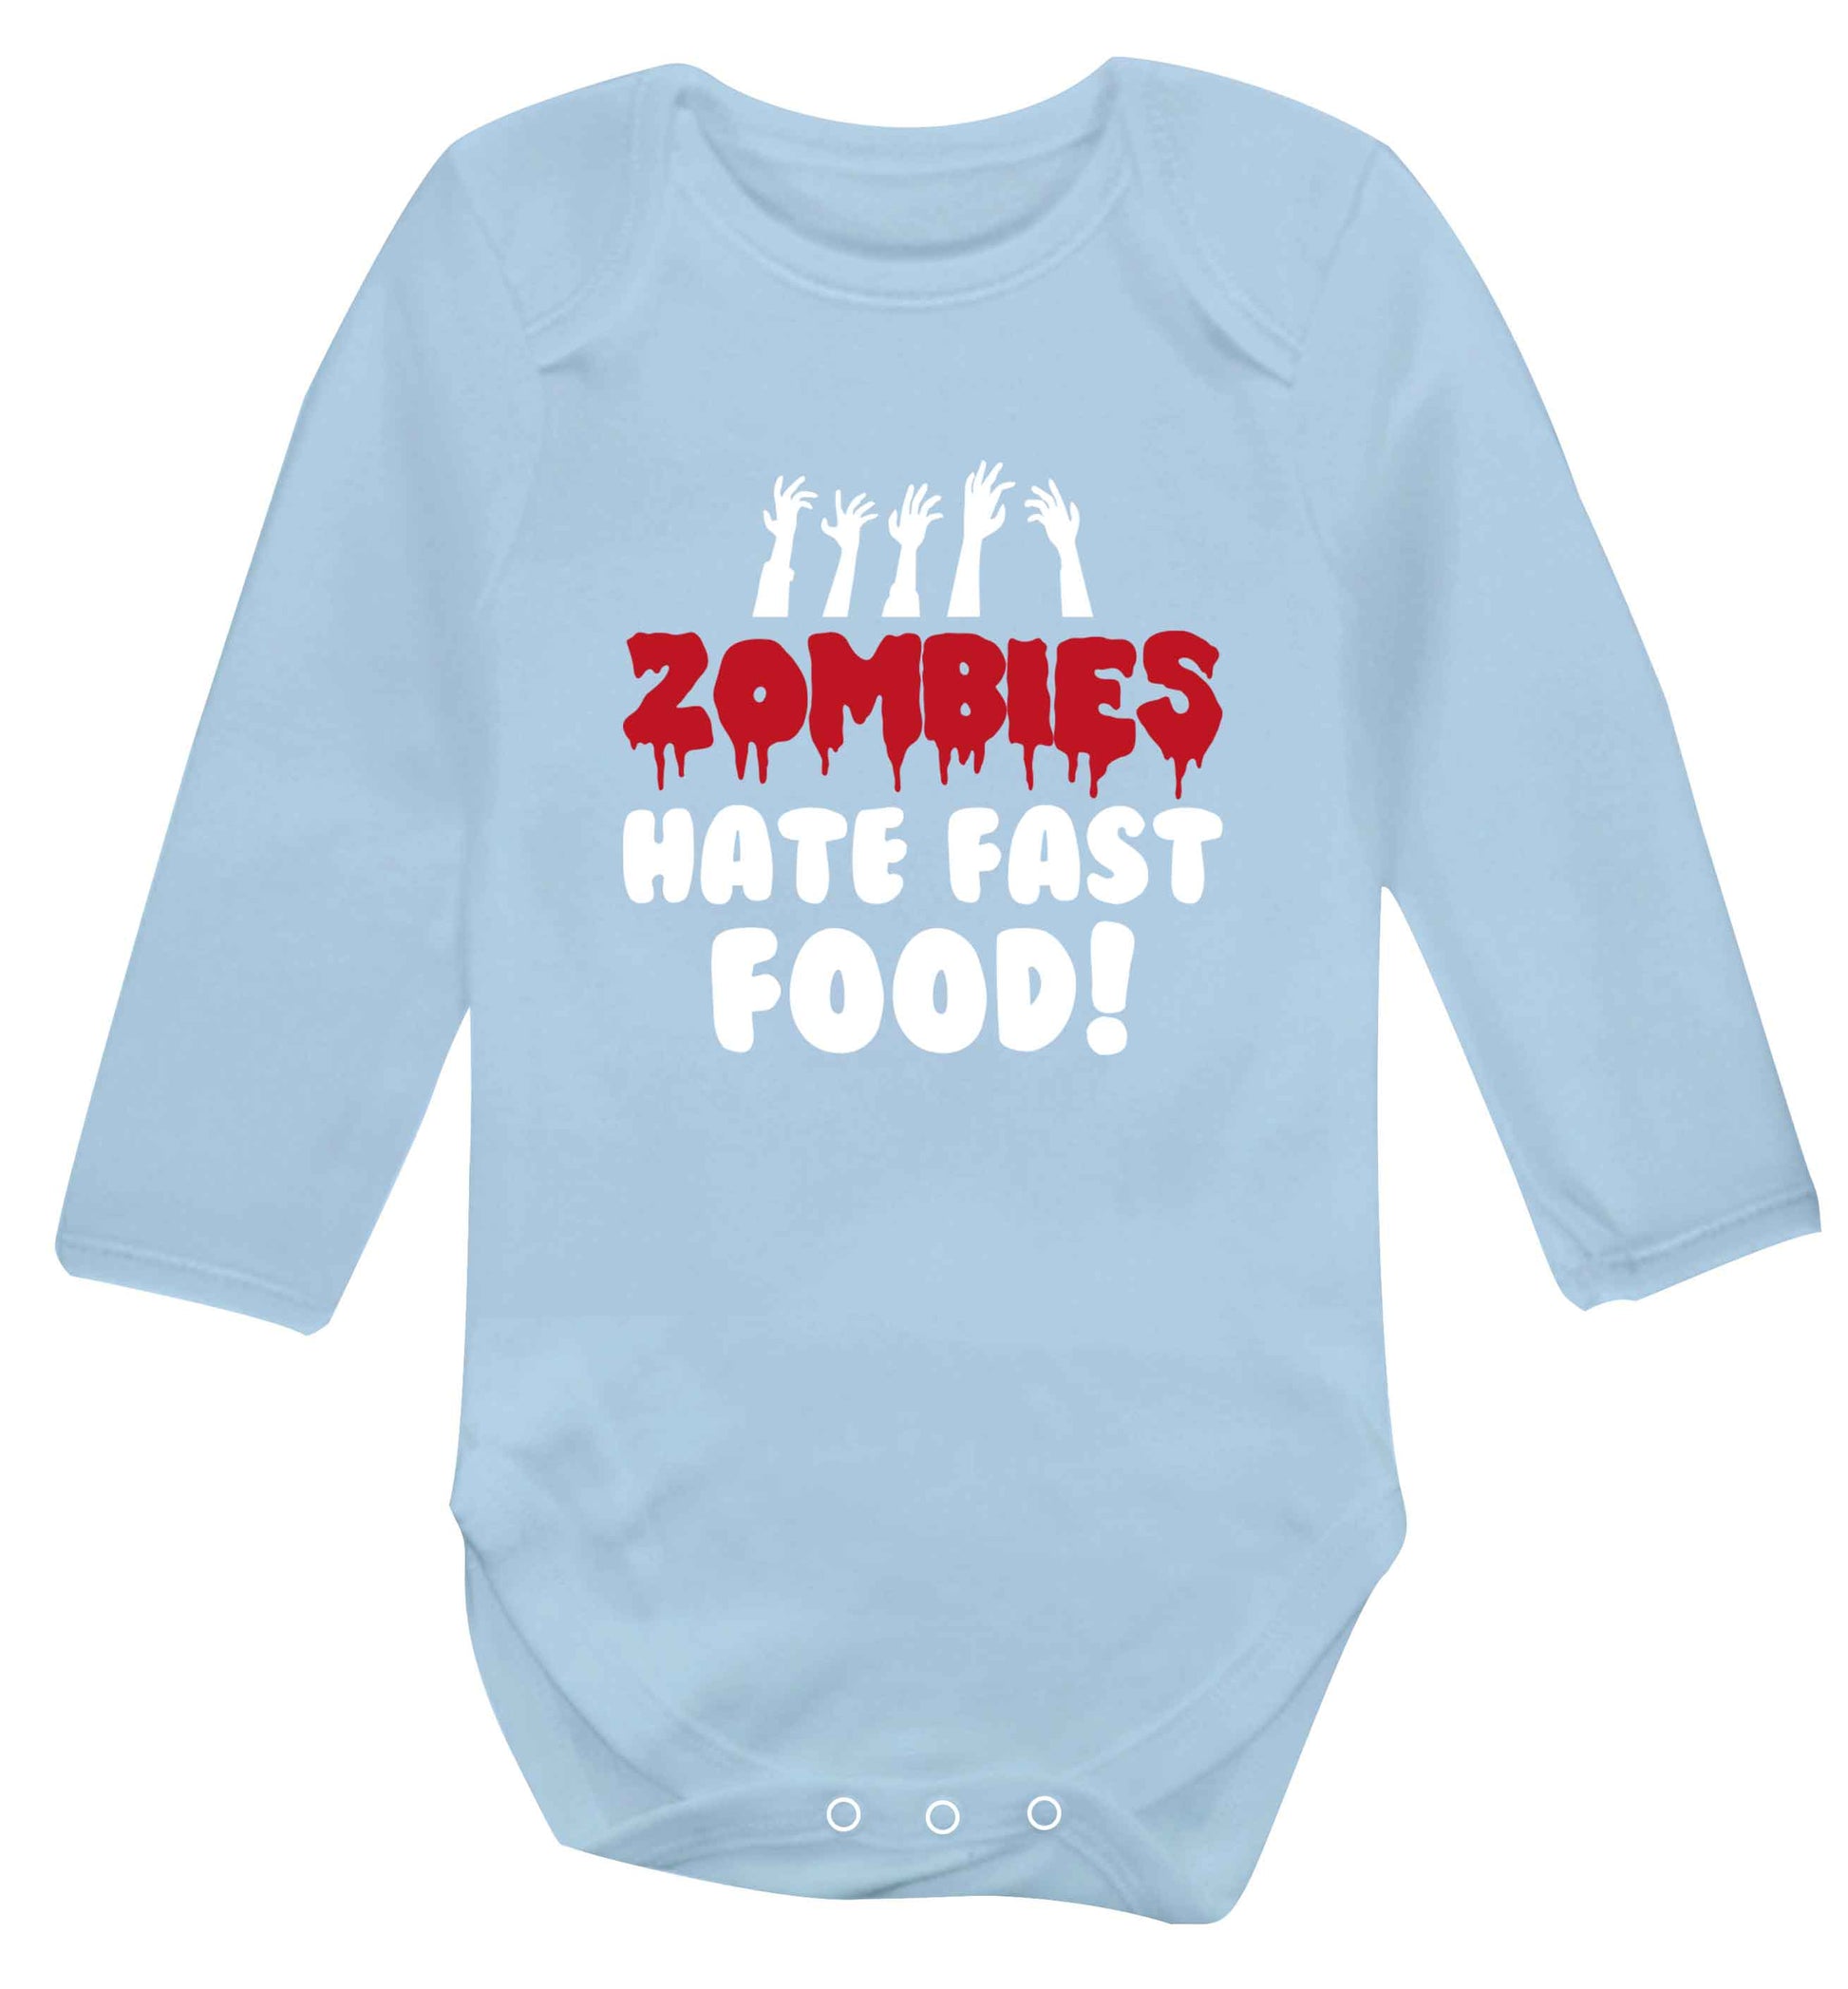 Zombies hate fast food baby vest long sleeved pale blue 6-12 months